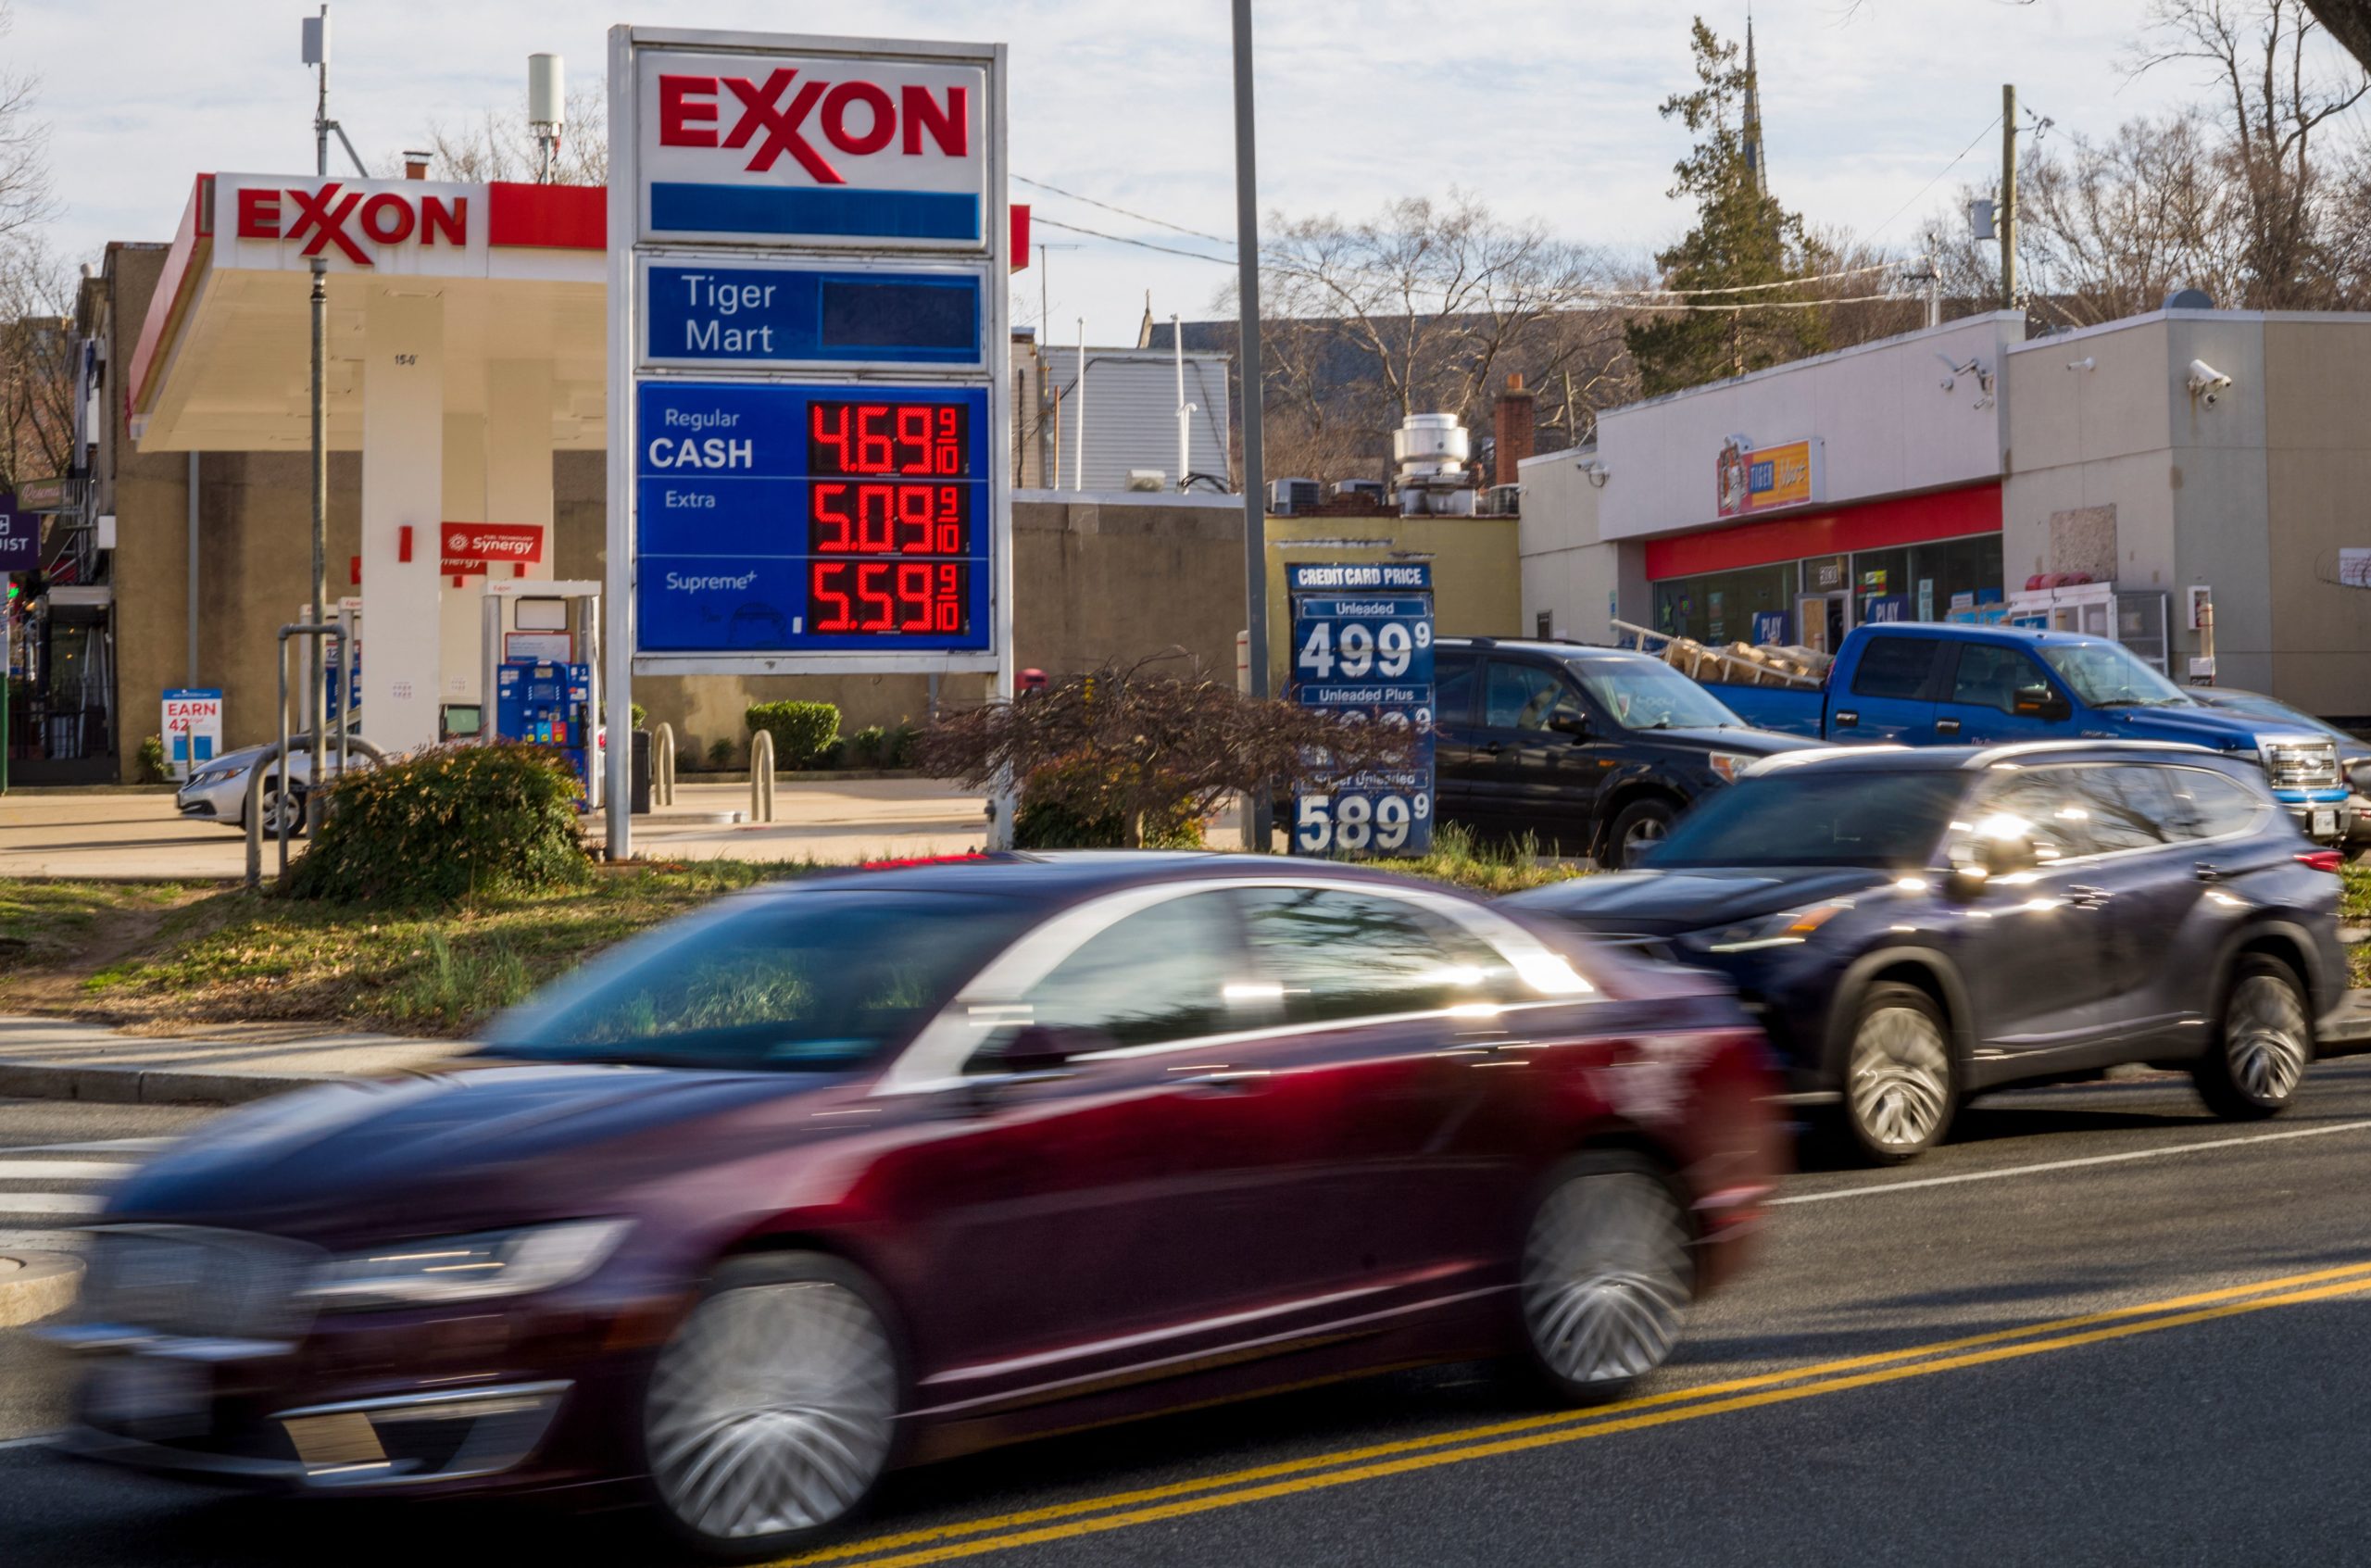 A sign shows the price of gasoline at a station in Washington, D.C. on Tuesday. (Mandel Ngan/AFP via Getty Images)